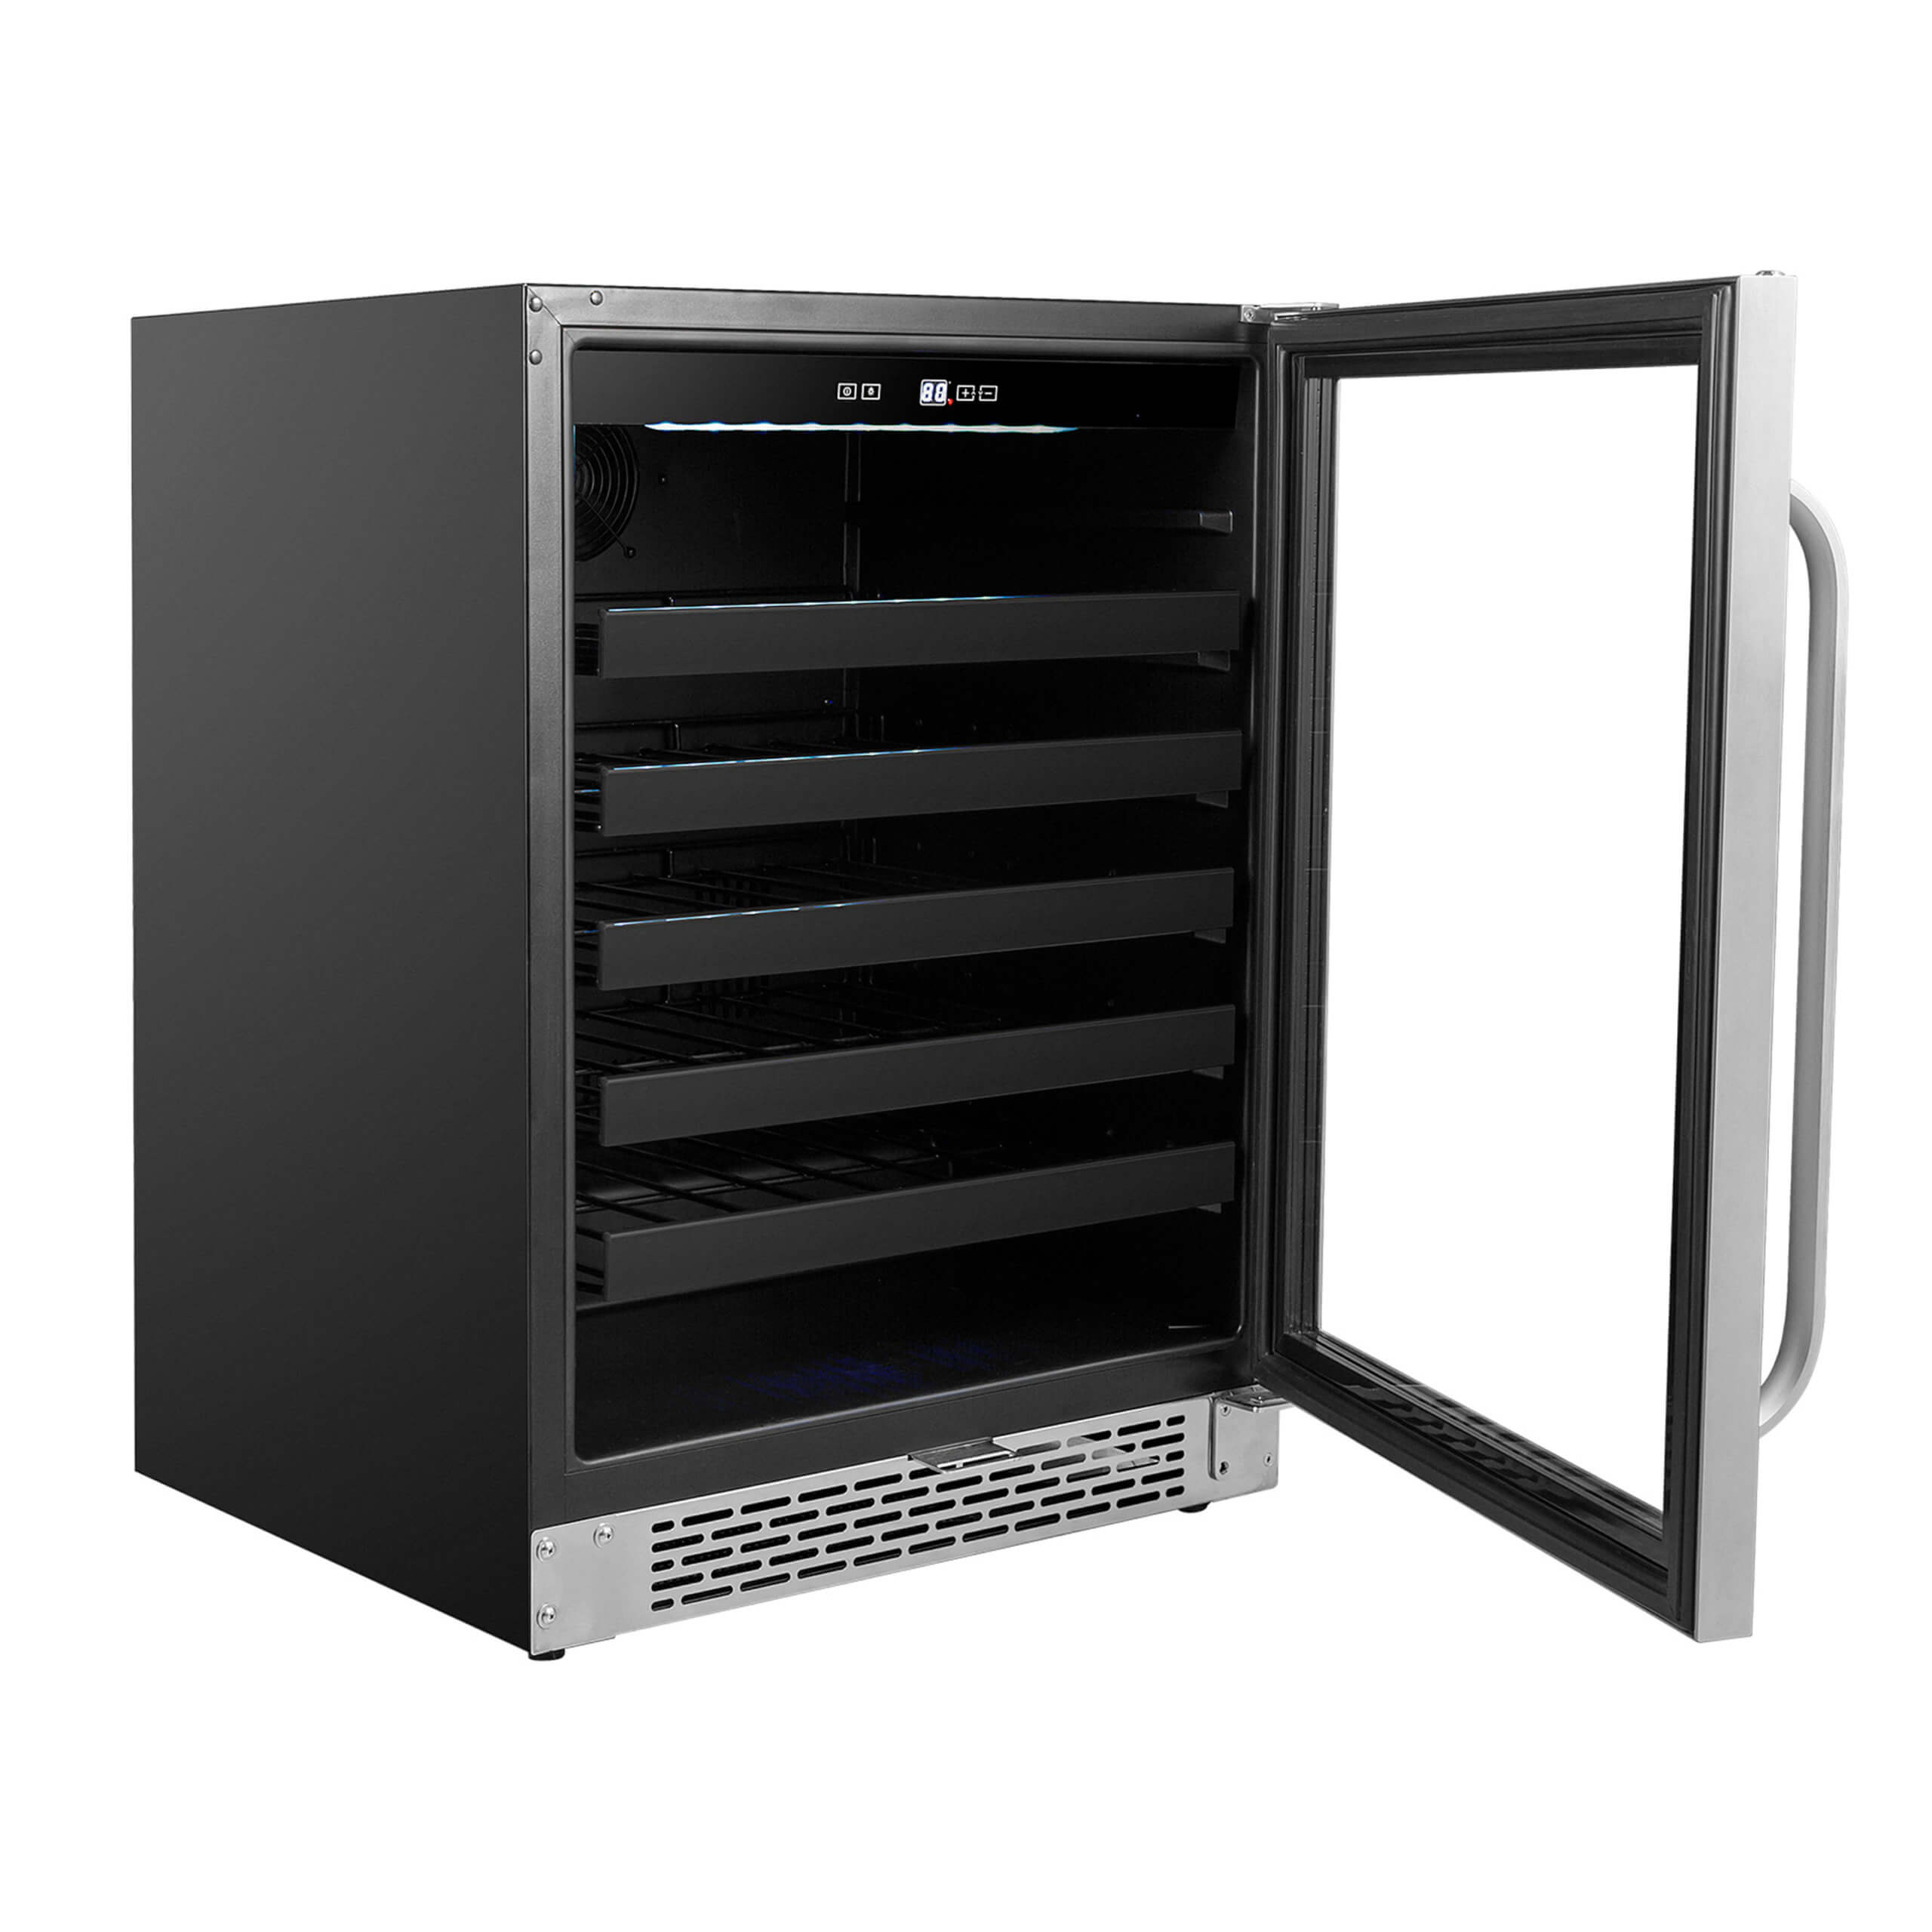 Whynter - 24" 46-Bottle Single-Zone Built-in Undercounter Stainless Steel Wine Cooler (BWR-408SB)